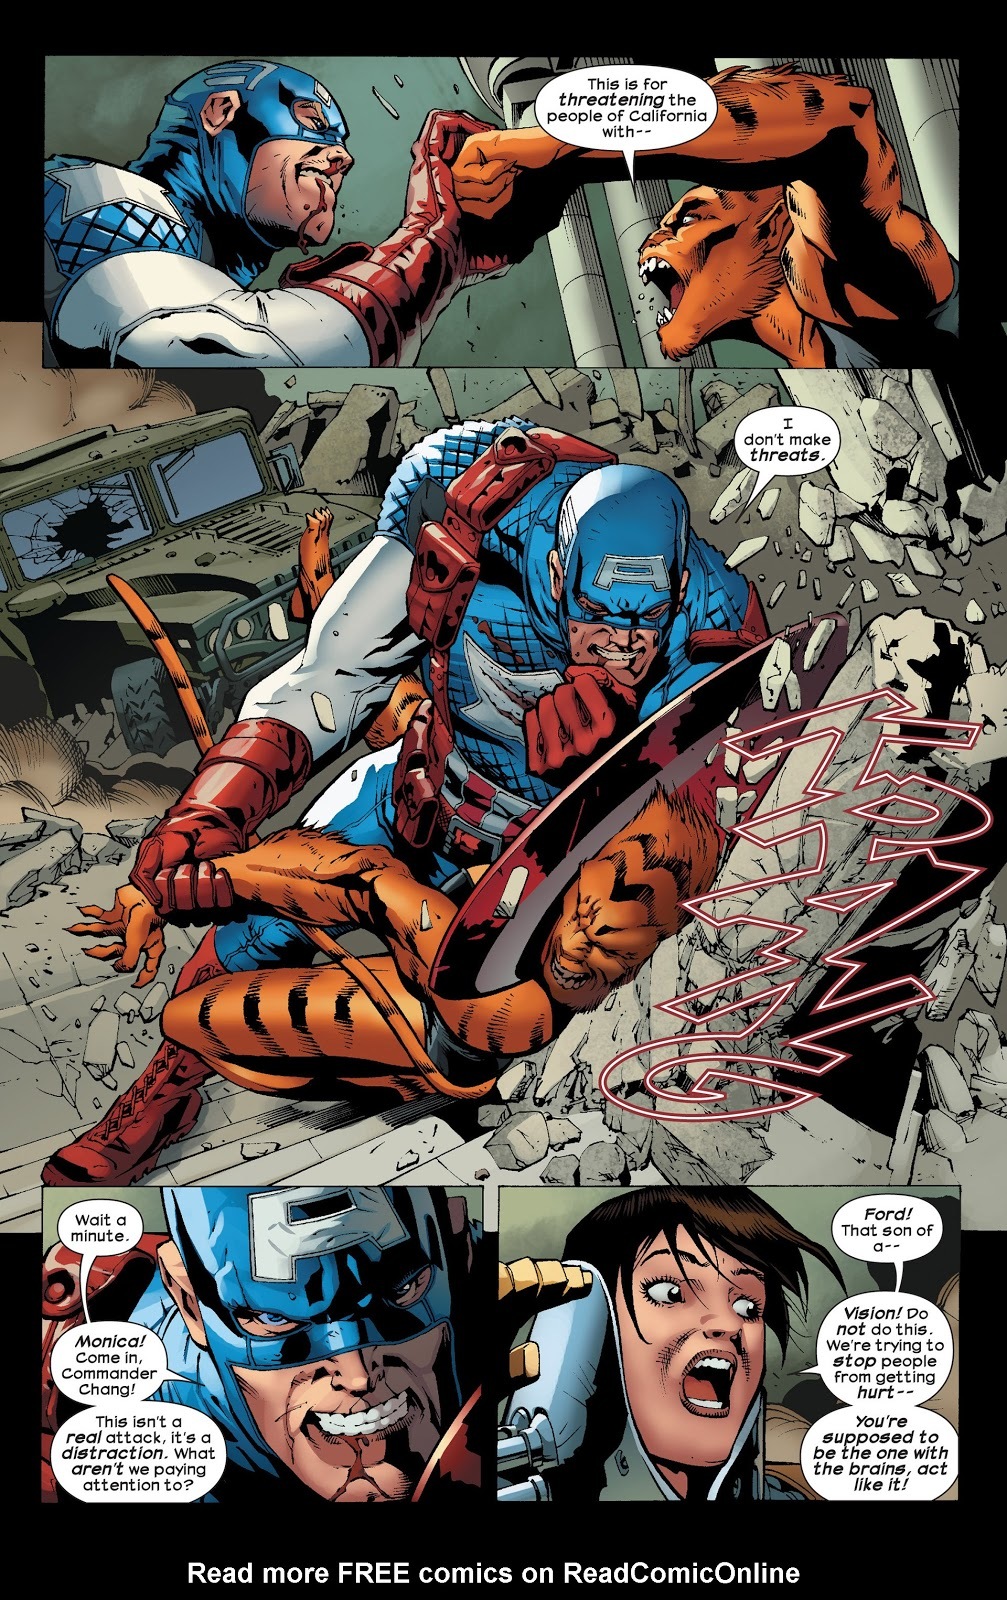 Ultimate Comics Ultimates #23 - Reconstruction, Part 5 of 6